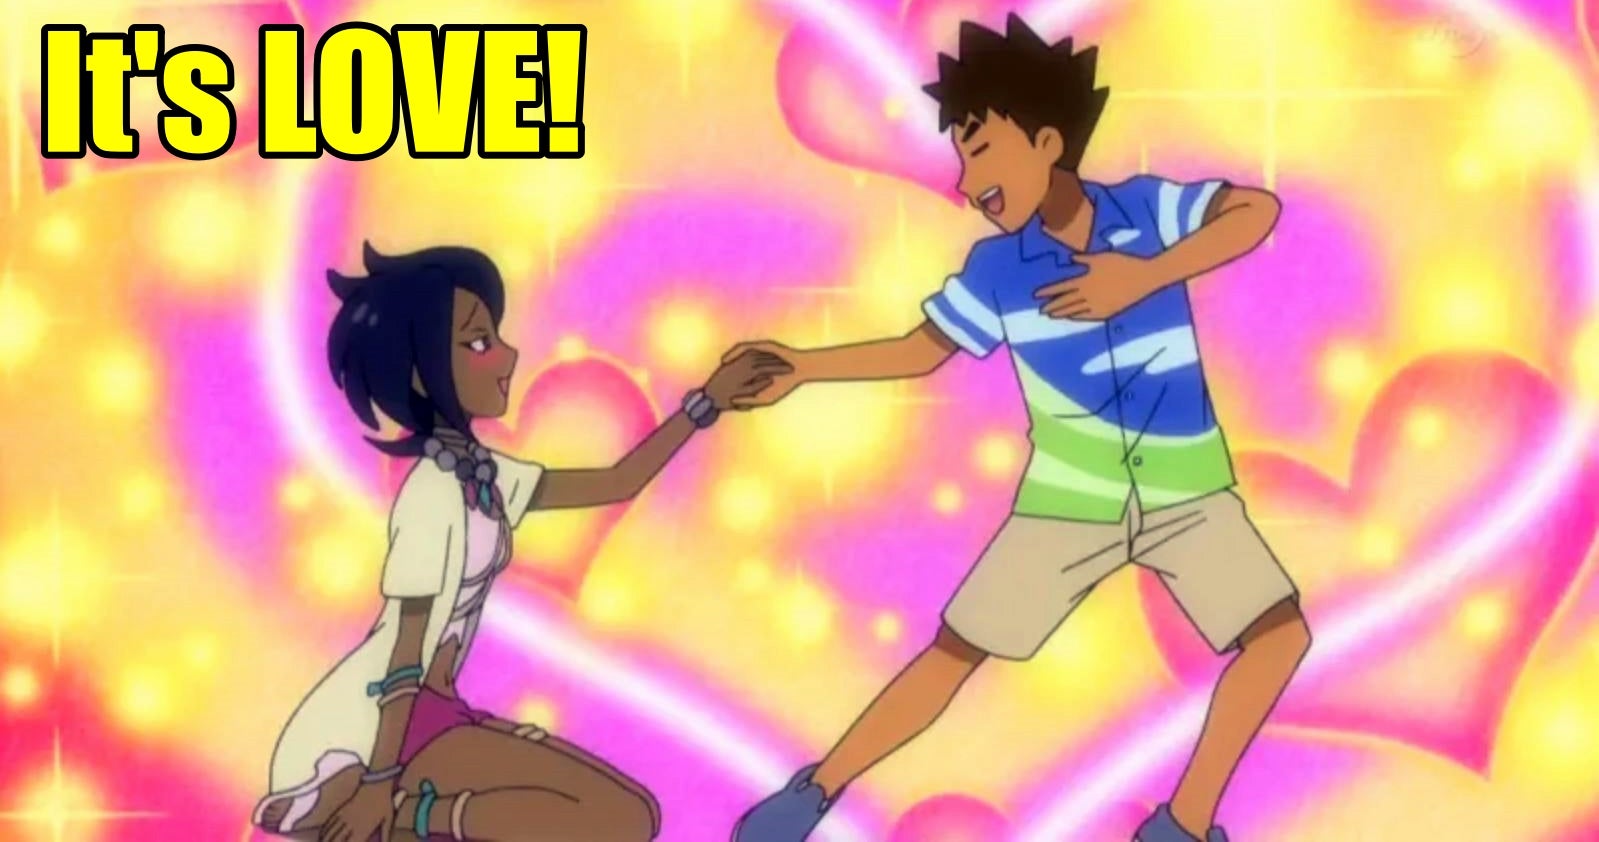 After 20 Years Of Being Single, Brock From Pokemon Finally Has A Girlfriend! - WORLD OF BUZZ 1